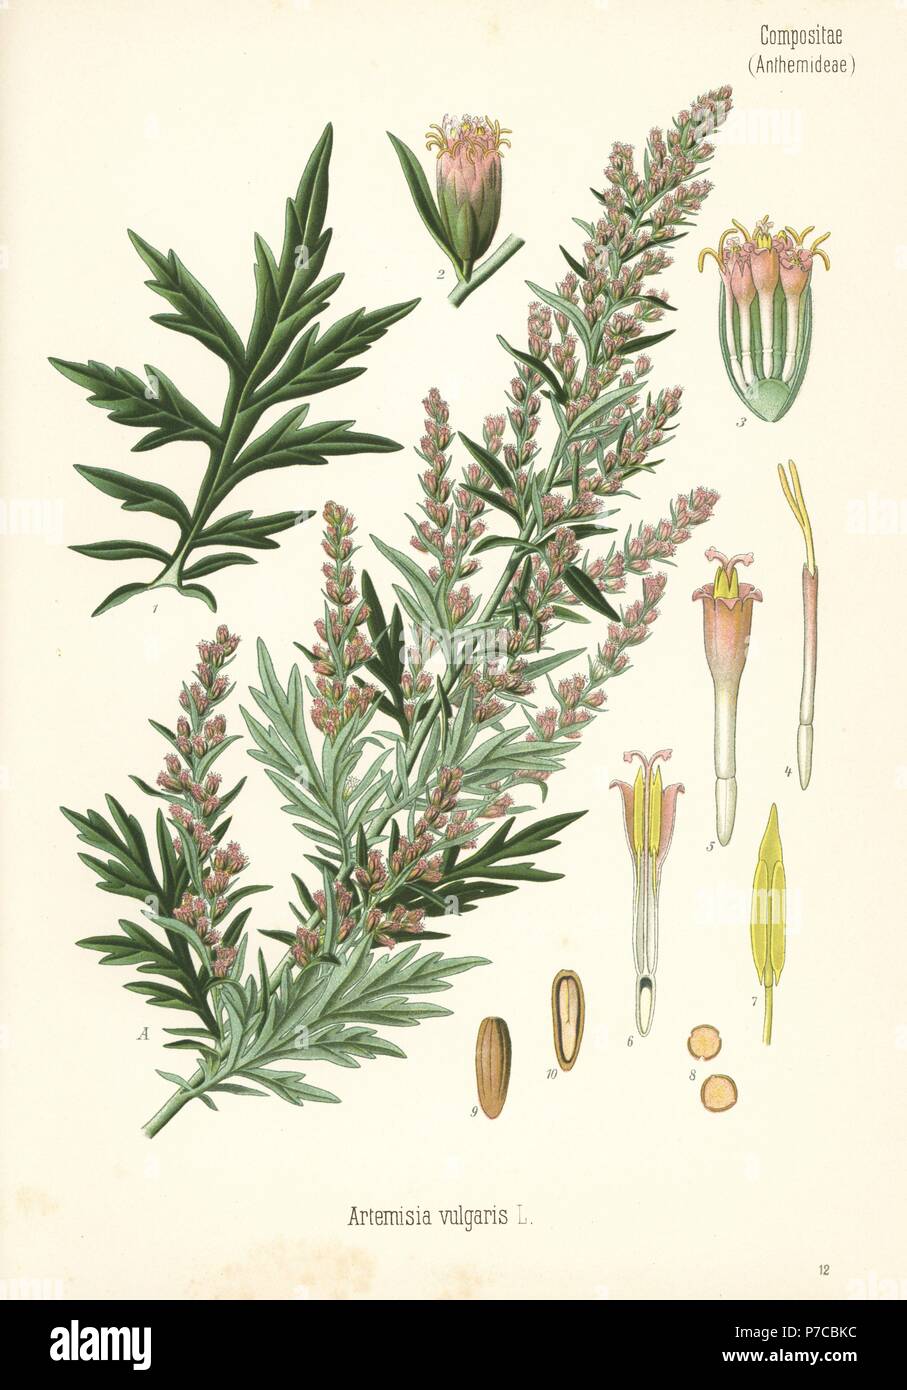 Mugwort or common wormwood, Artemisia vulgaris. Chromolithograph after a botanical illustration from Hermann Adolph Koehler's Medicinal Plants, edited by Gustav Pabst, Koehler, Germany, 1887. Stock Photo